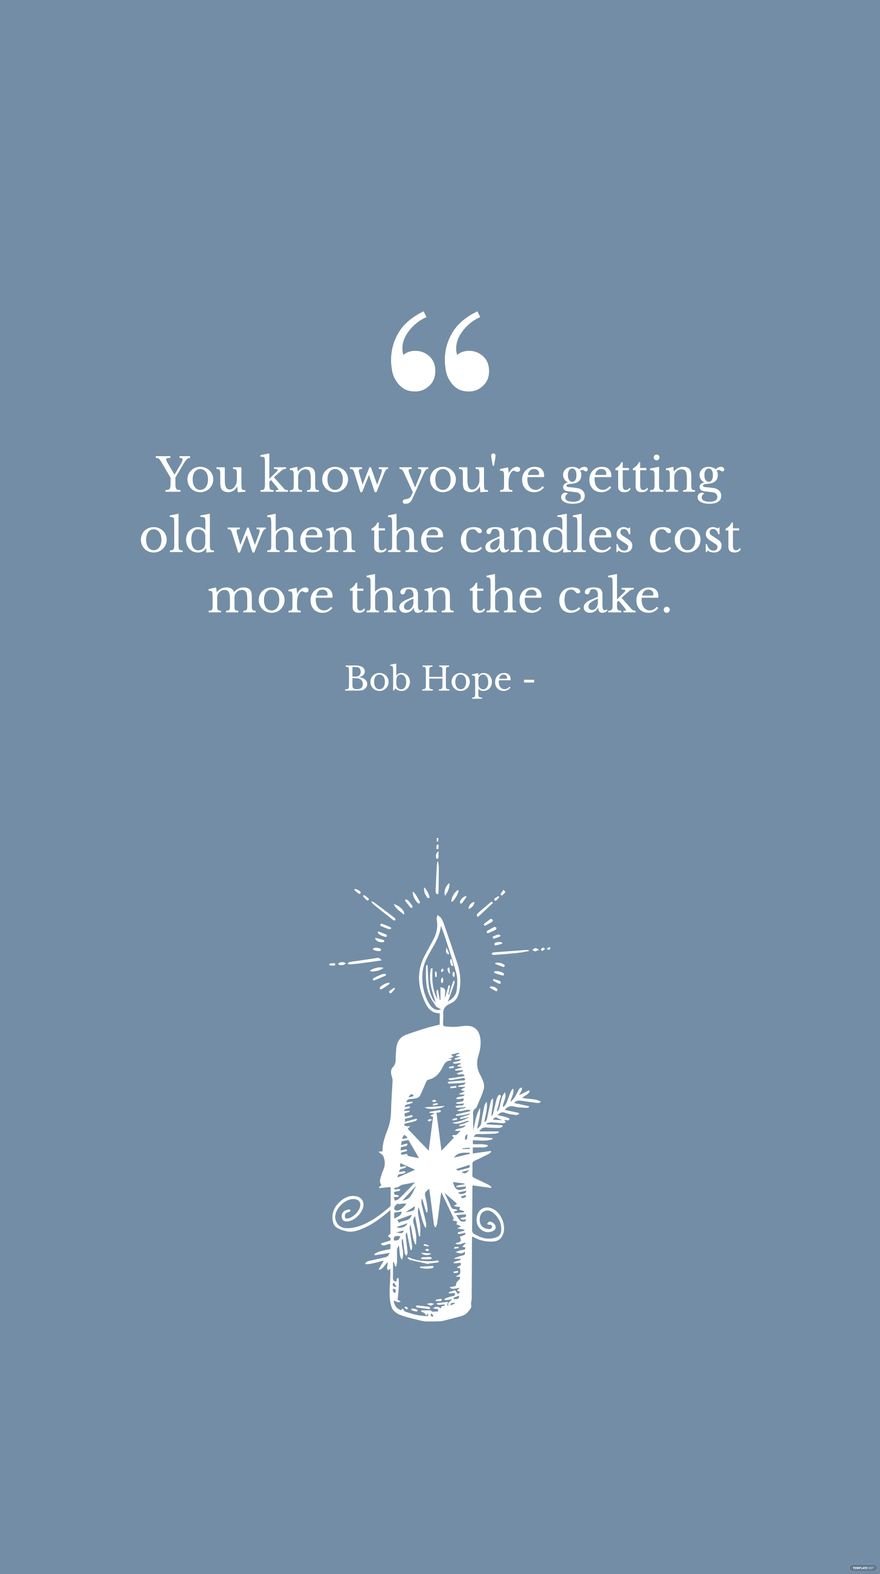 Free Bob Hope - You know you're getting old when the candles cost more than the cake. in JPG